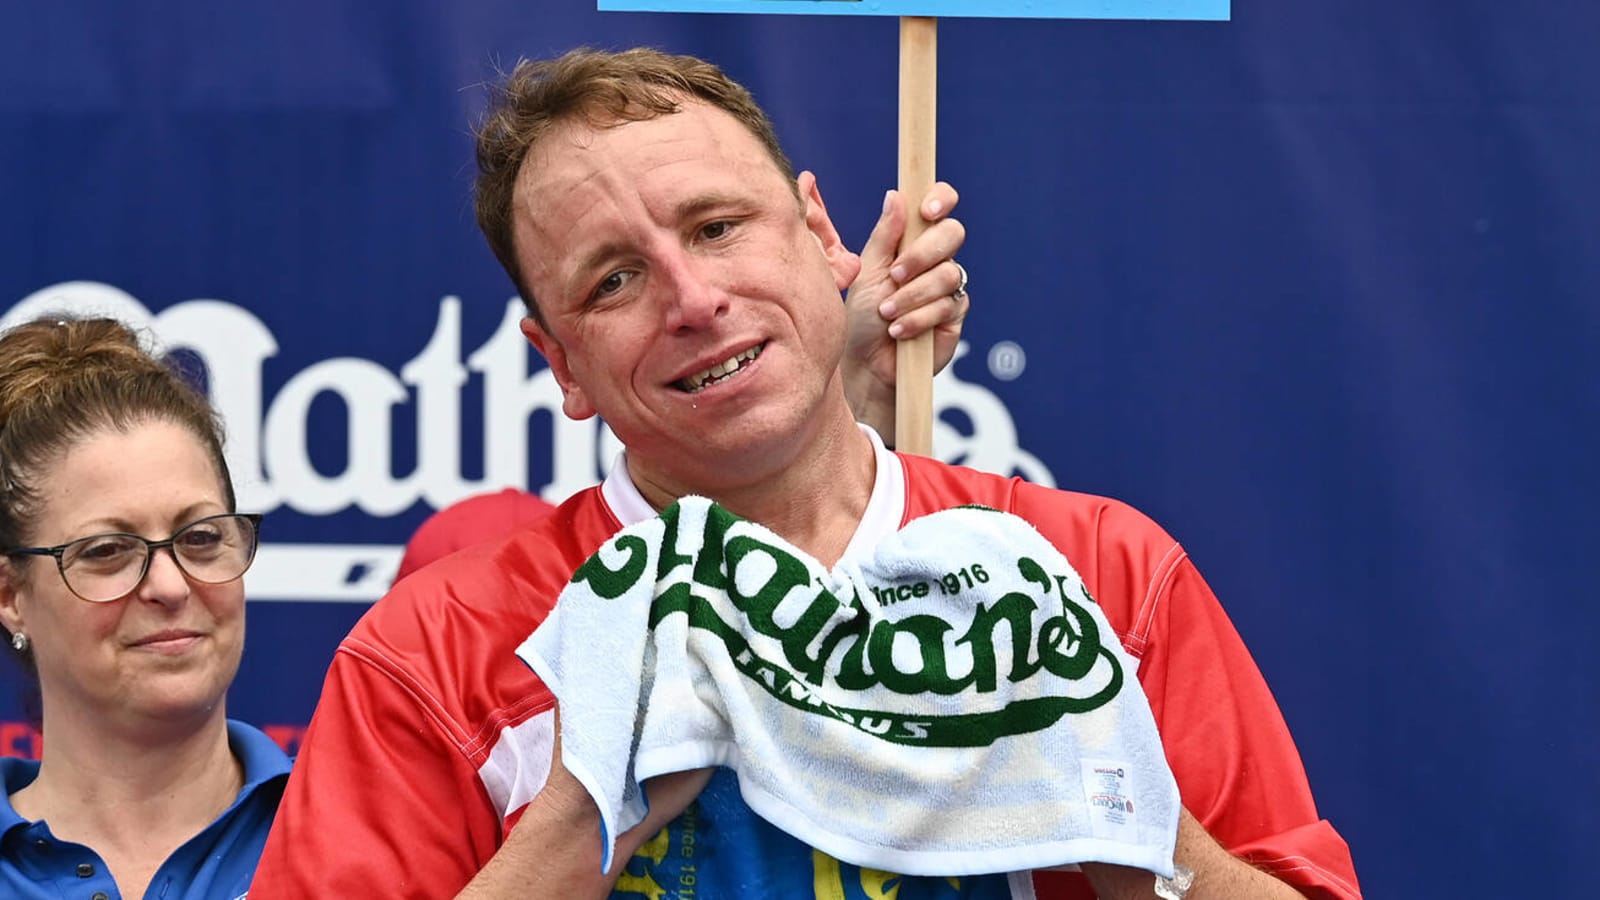 Joey Chestnut wins 16th hot dog eating contest after lightning delay